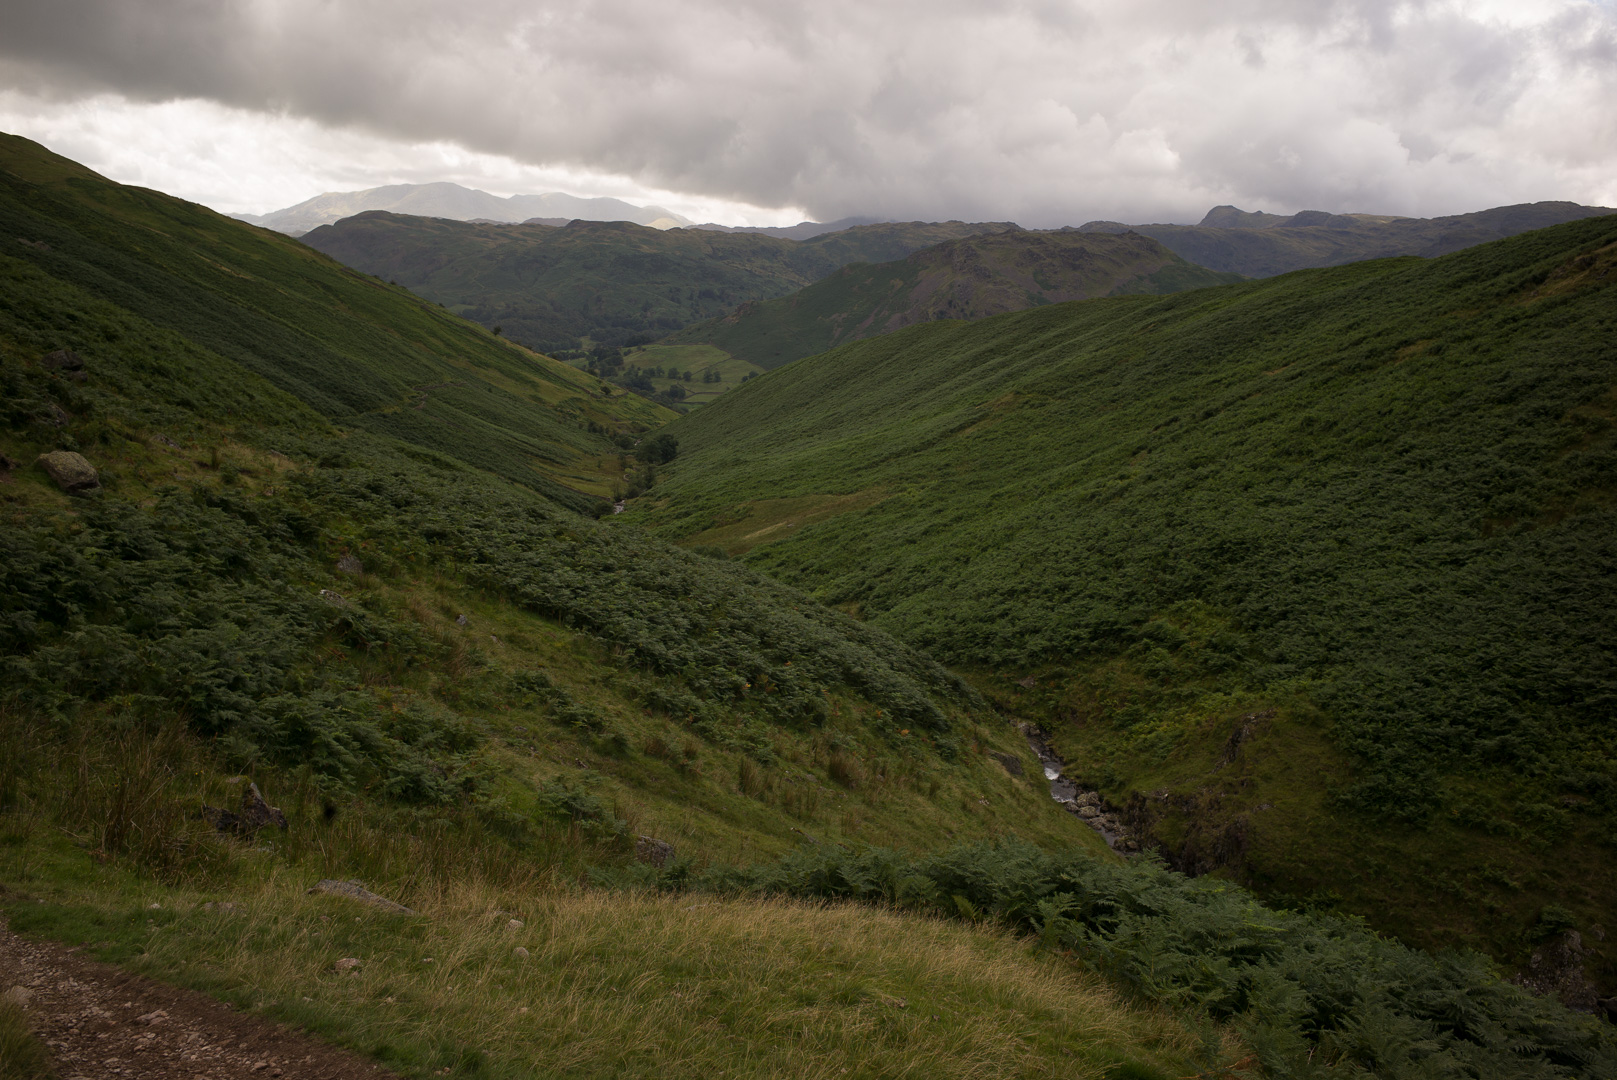 Going up the valley to Grisedale Pass, you look back down towards Grasmere (off to the left, but out of sight).